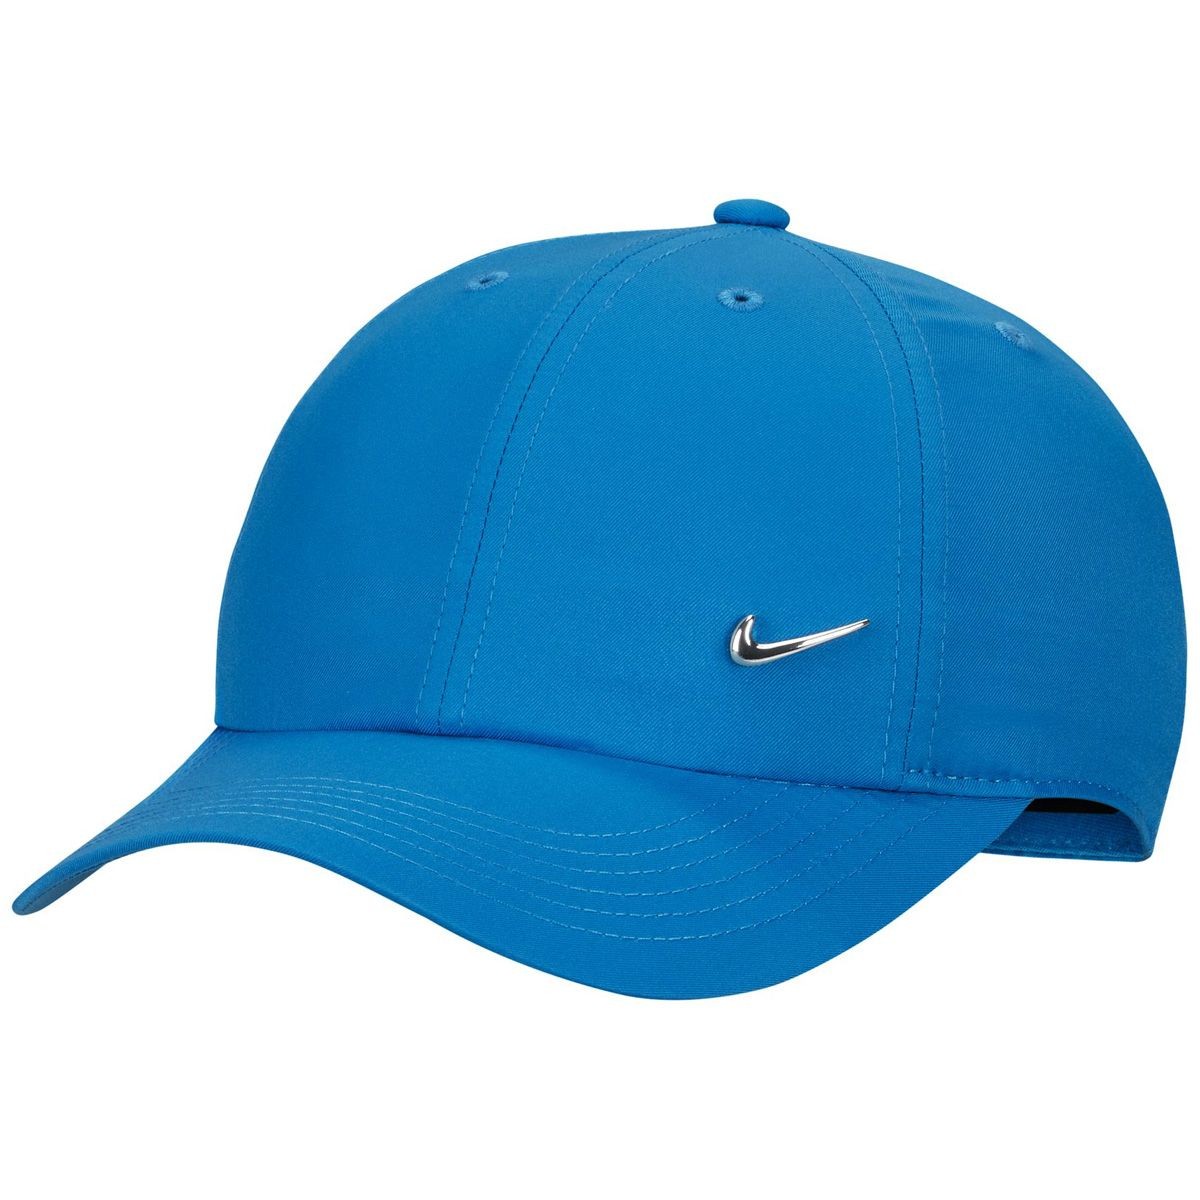 Кепка детская Nike Club Unstructured Metal Swoosh Youth Cap photo blue